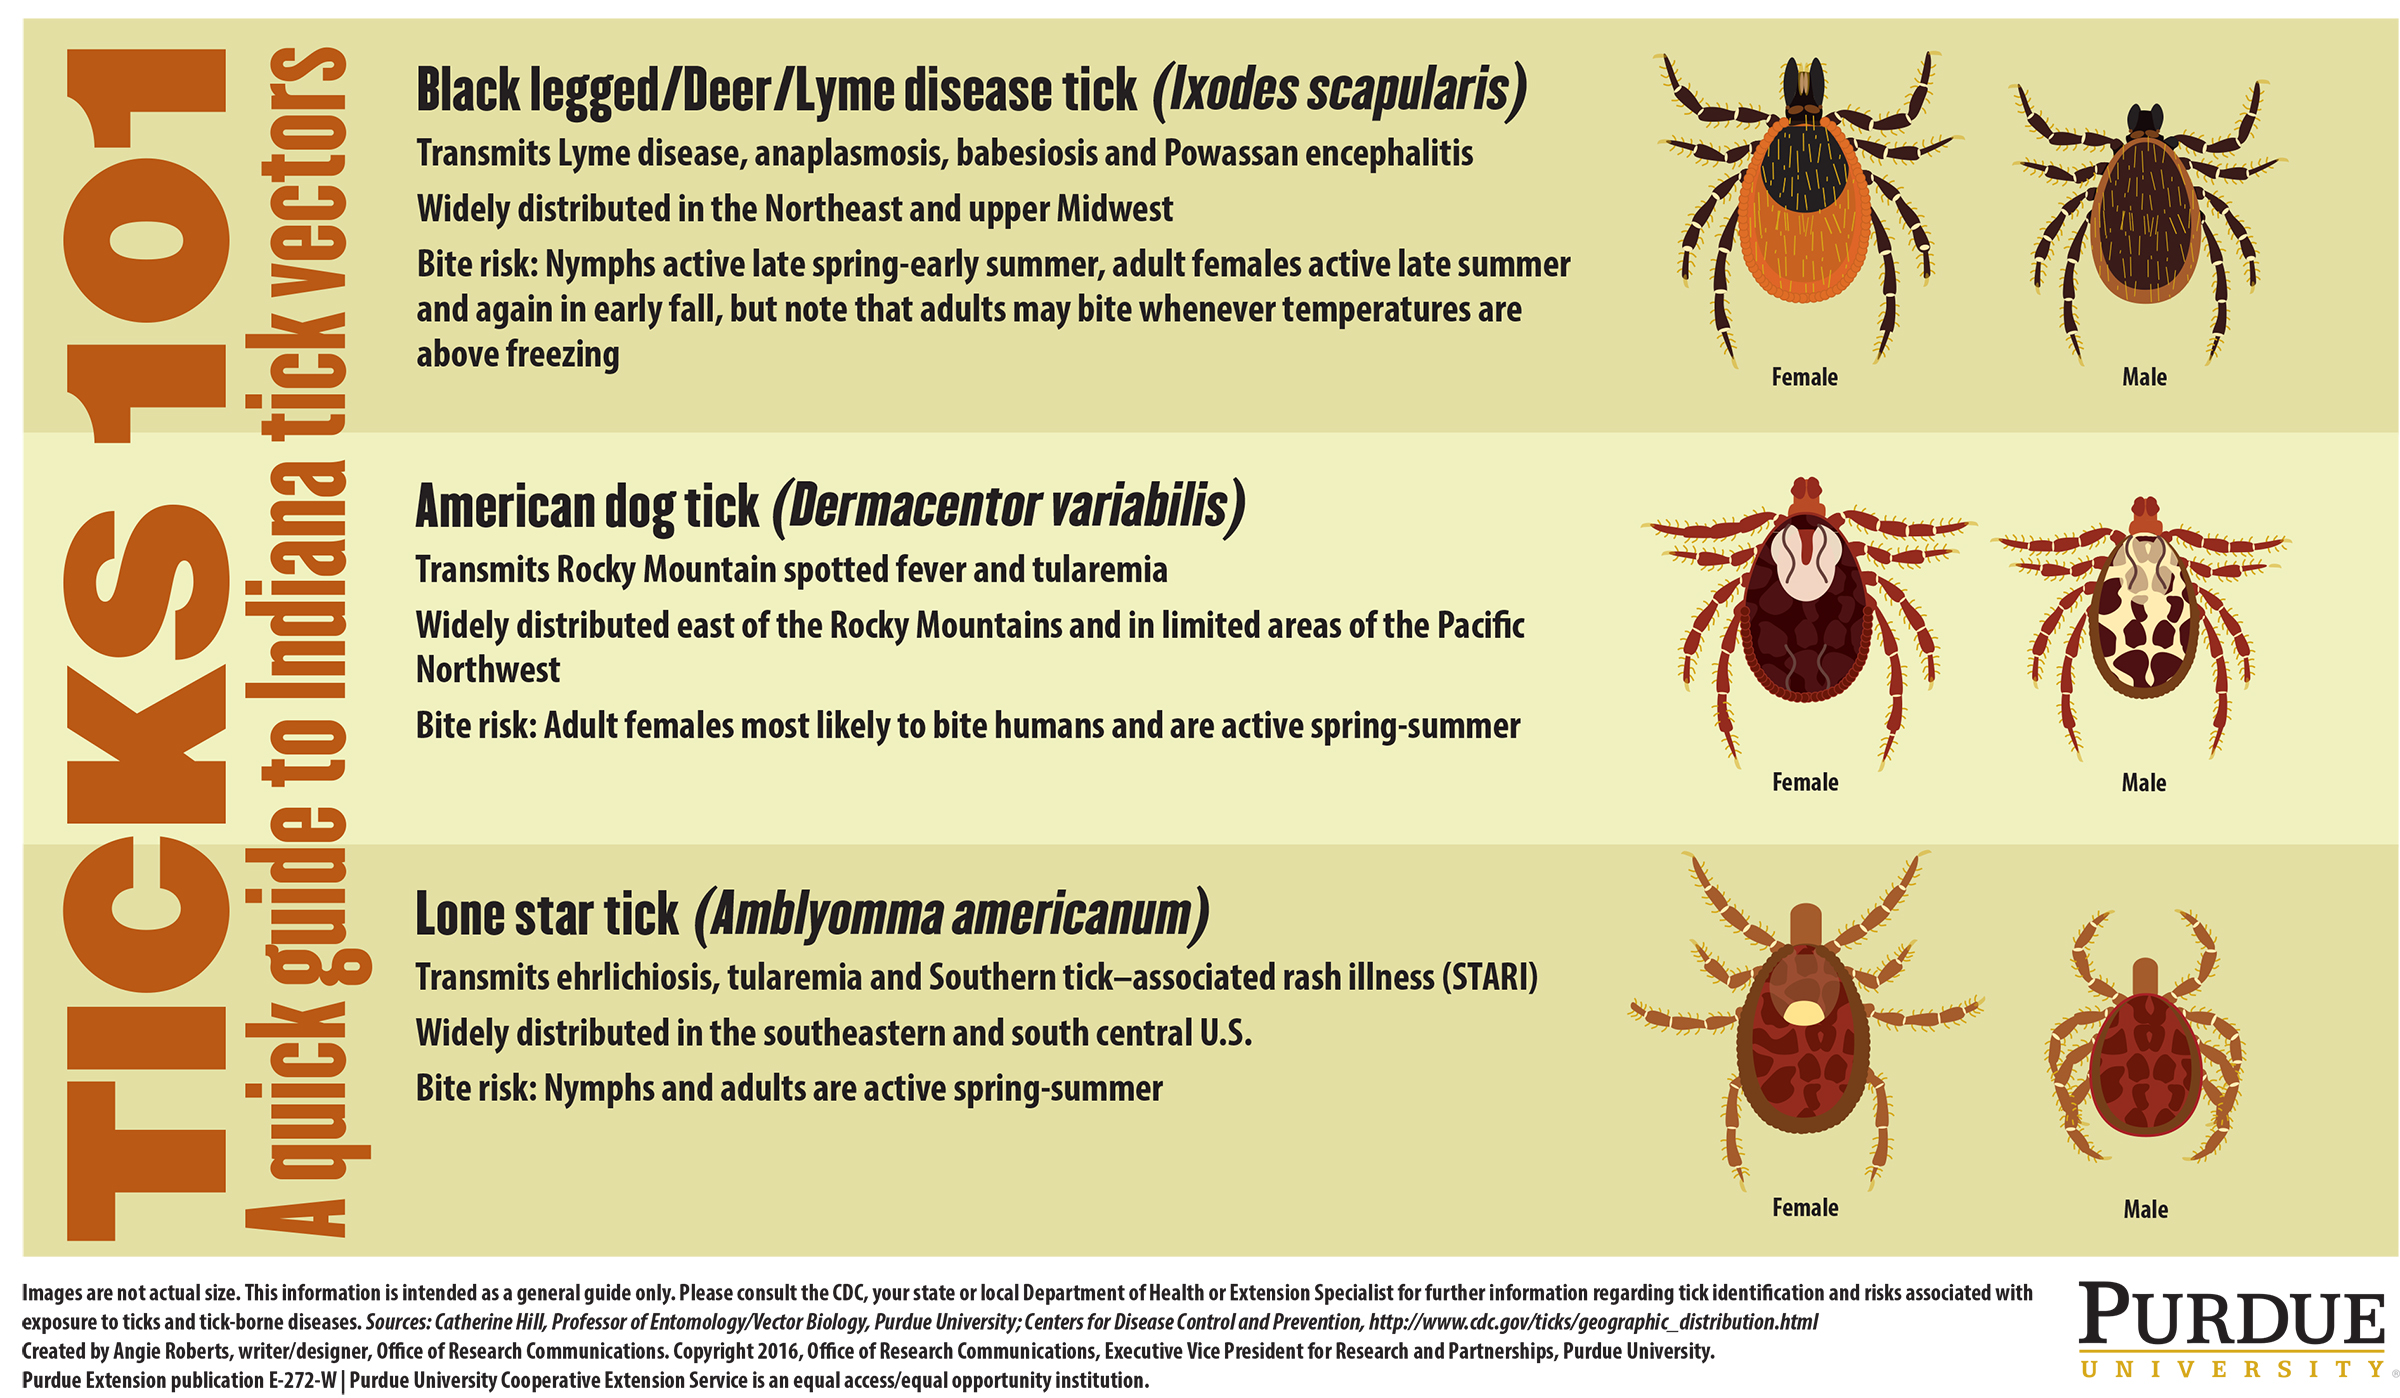 Can a Dog Tick Cause Lyme Disease?